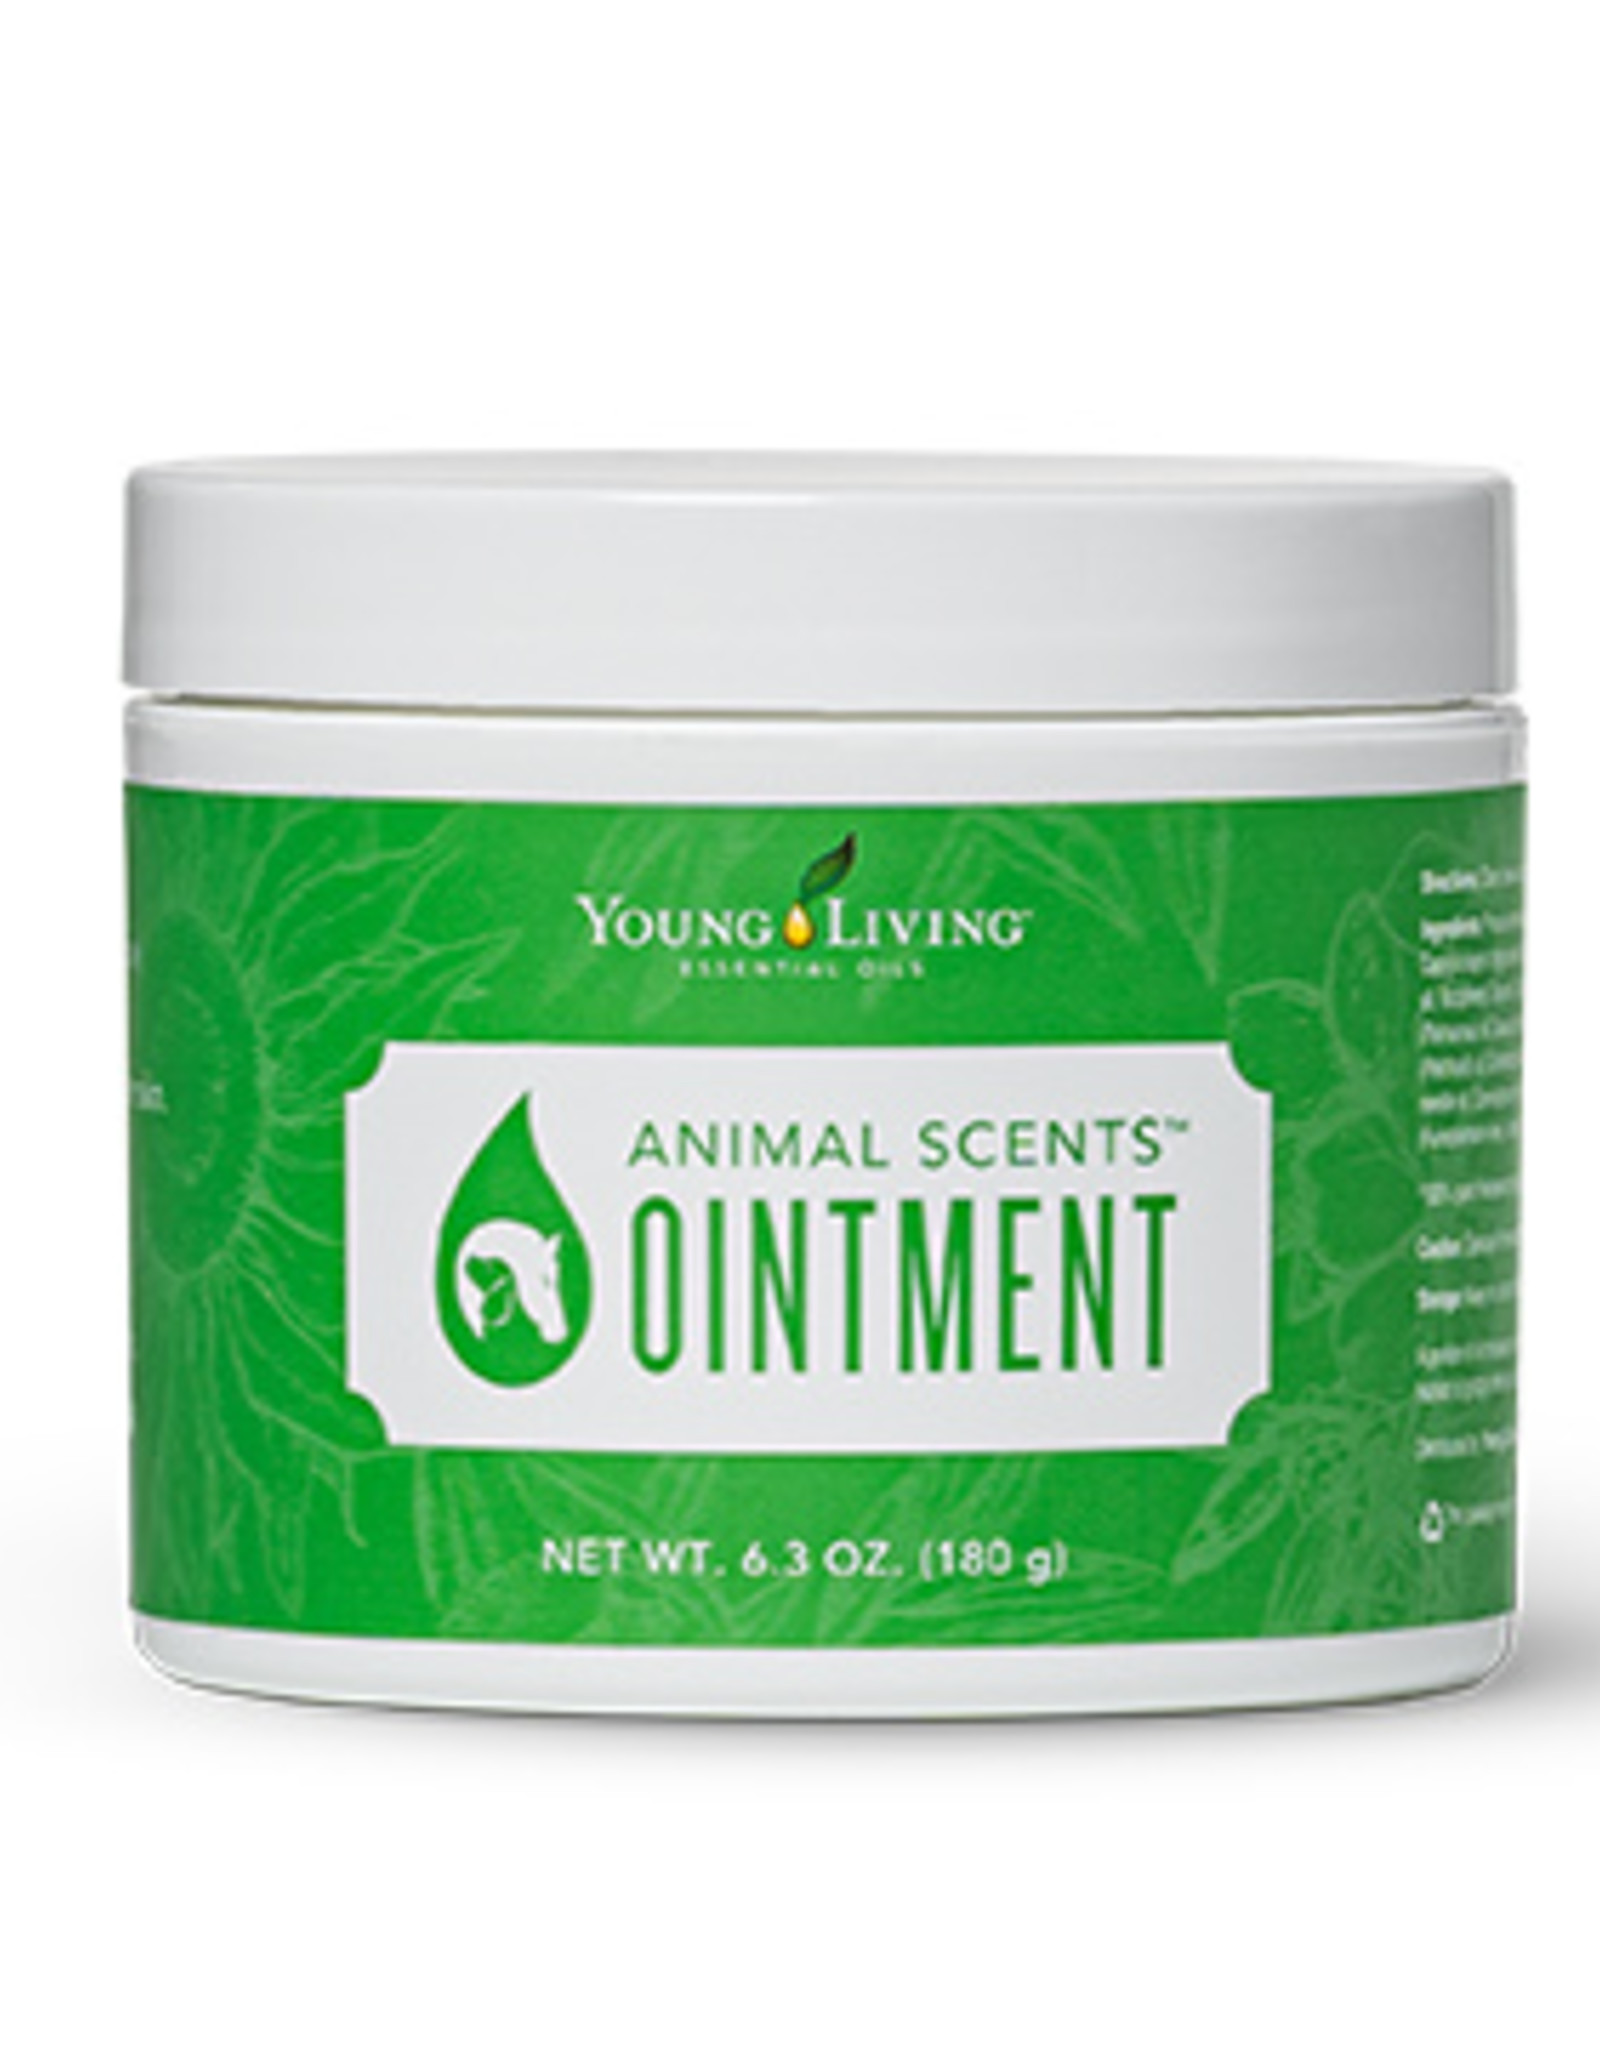 Young Living Animal Scents Ointment - 6.3oz